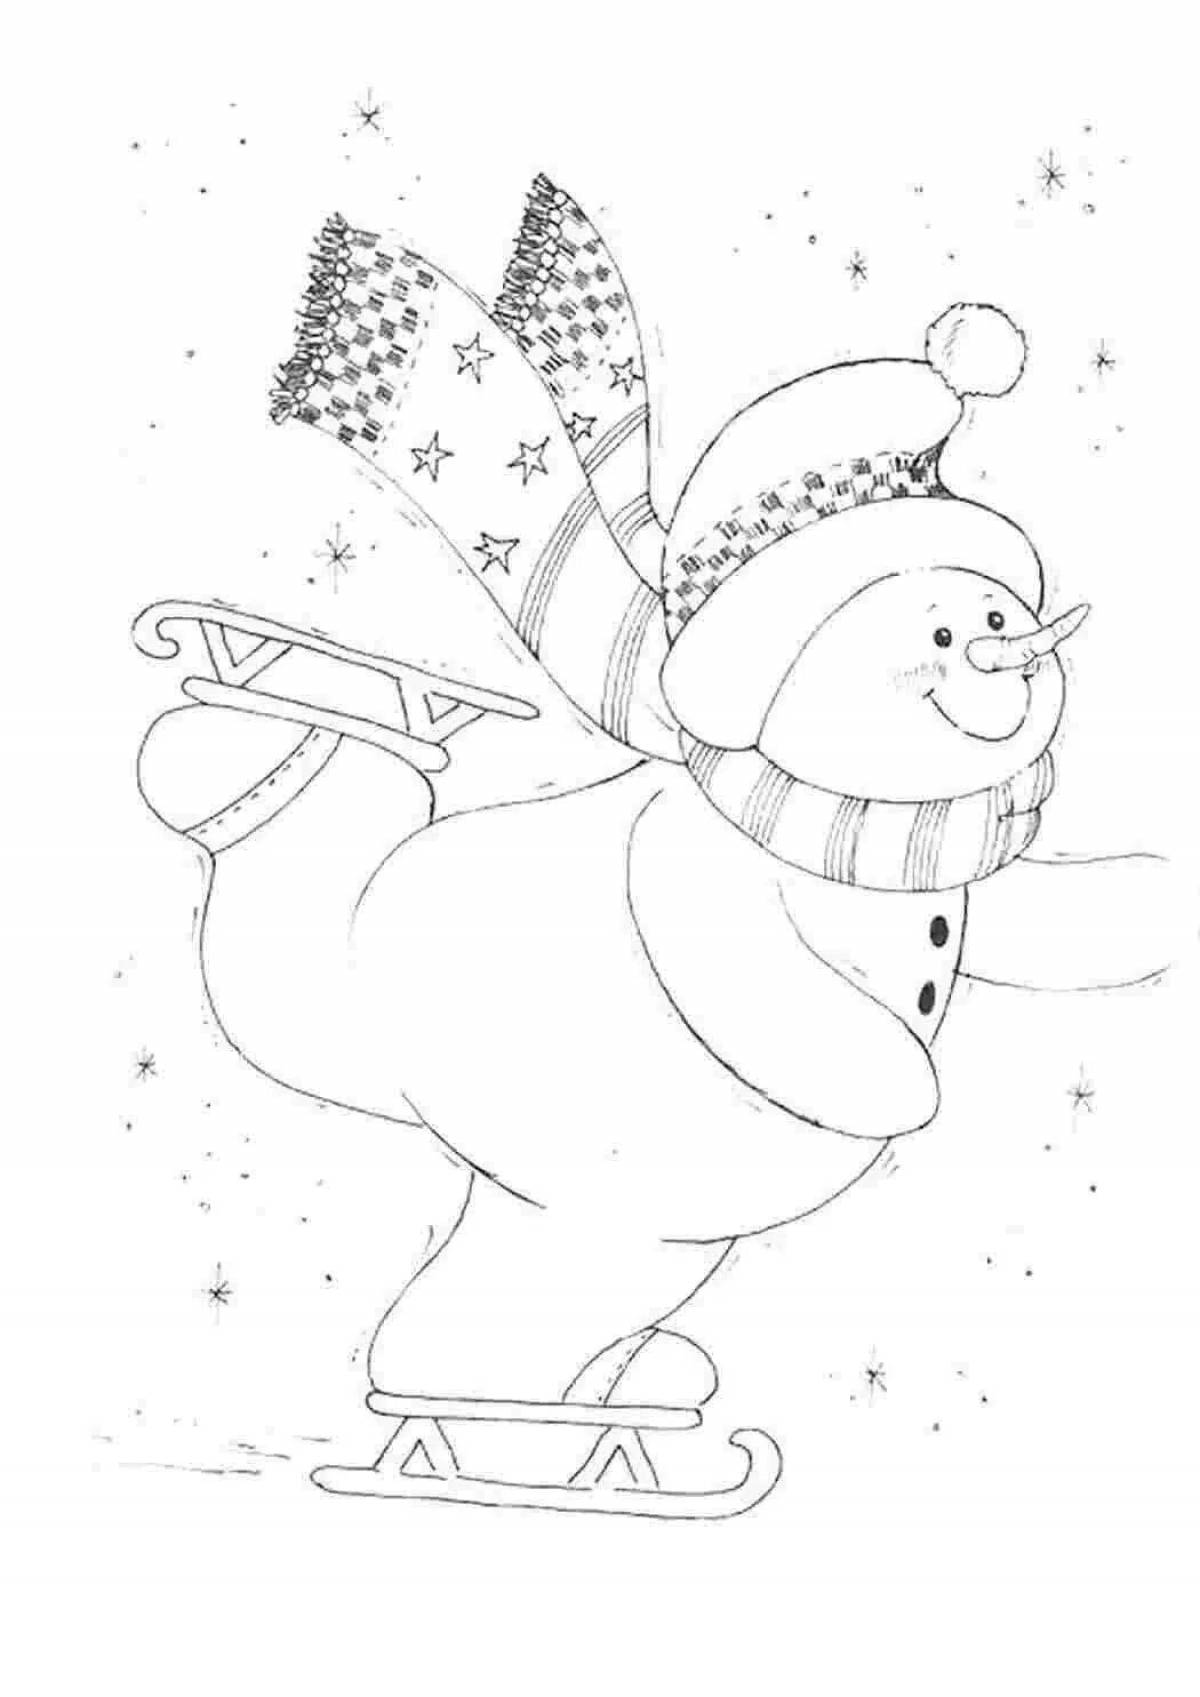 Amazing coloring book snowman on skates for kids